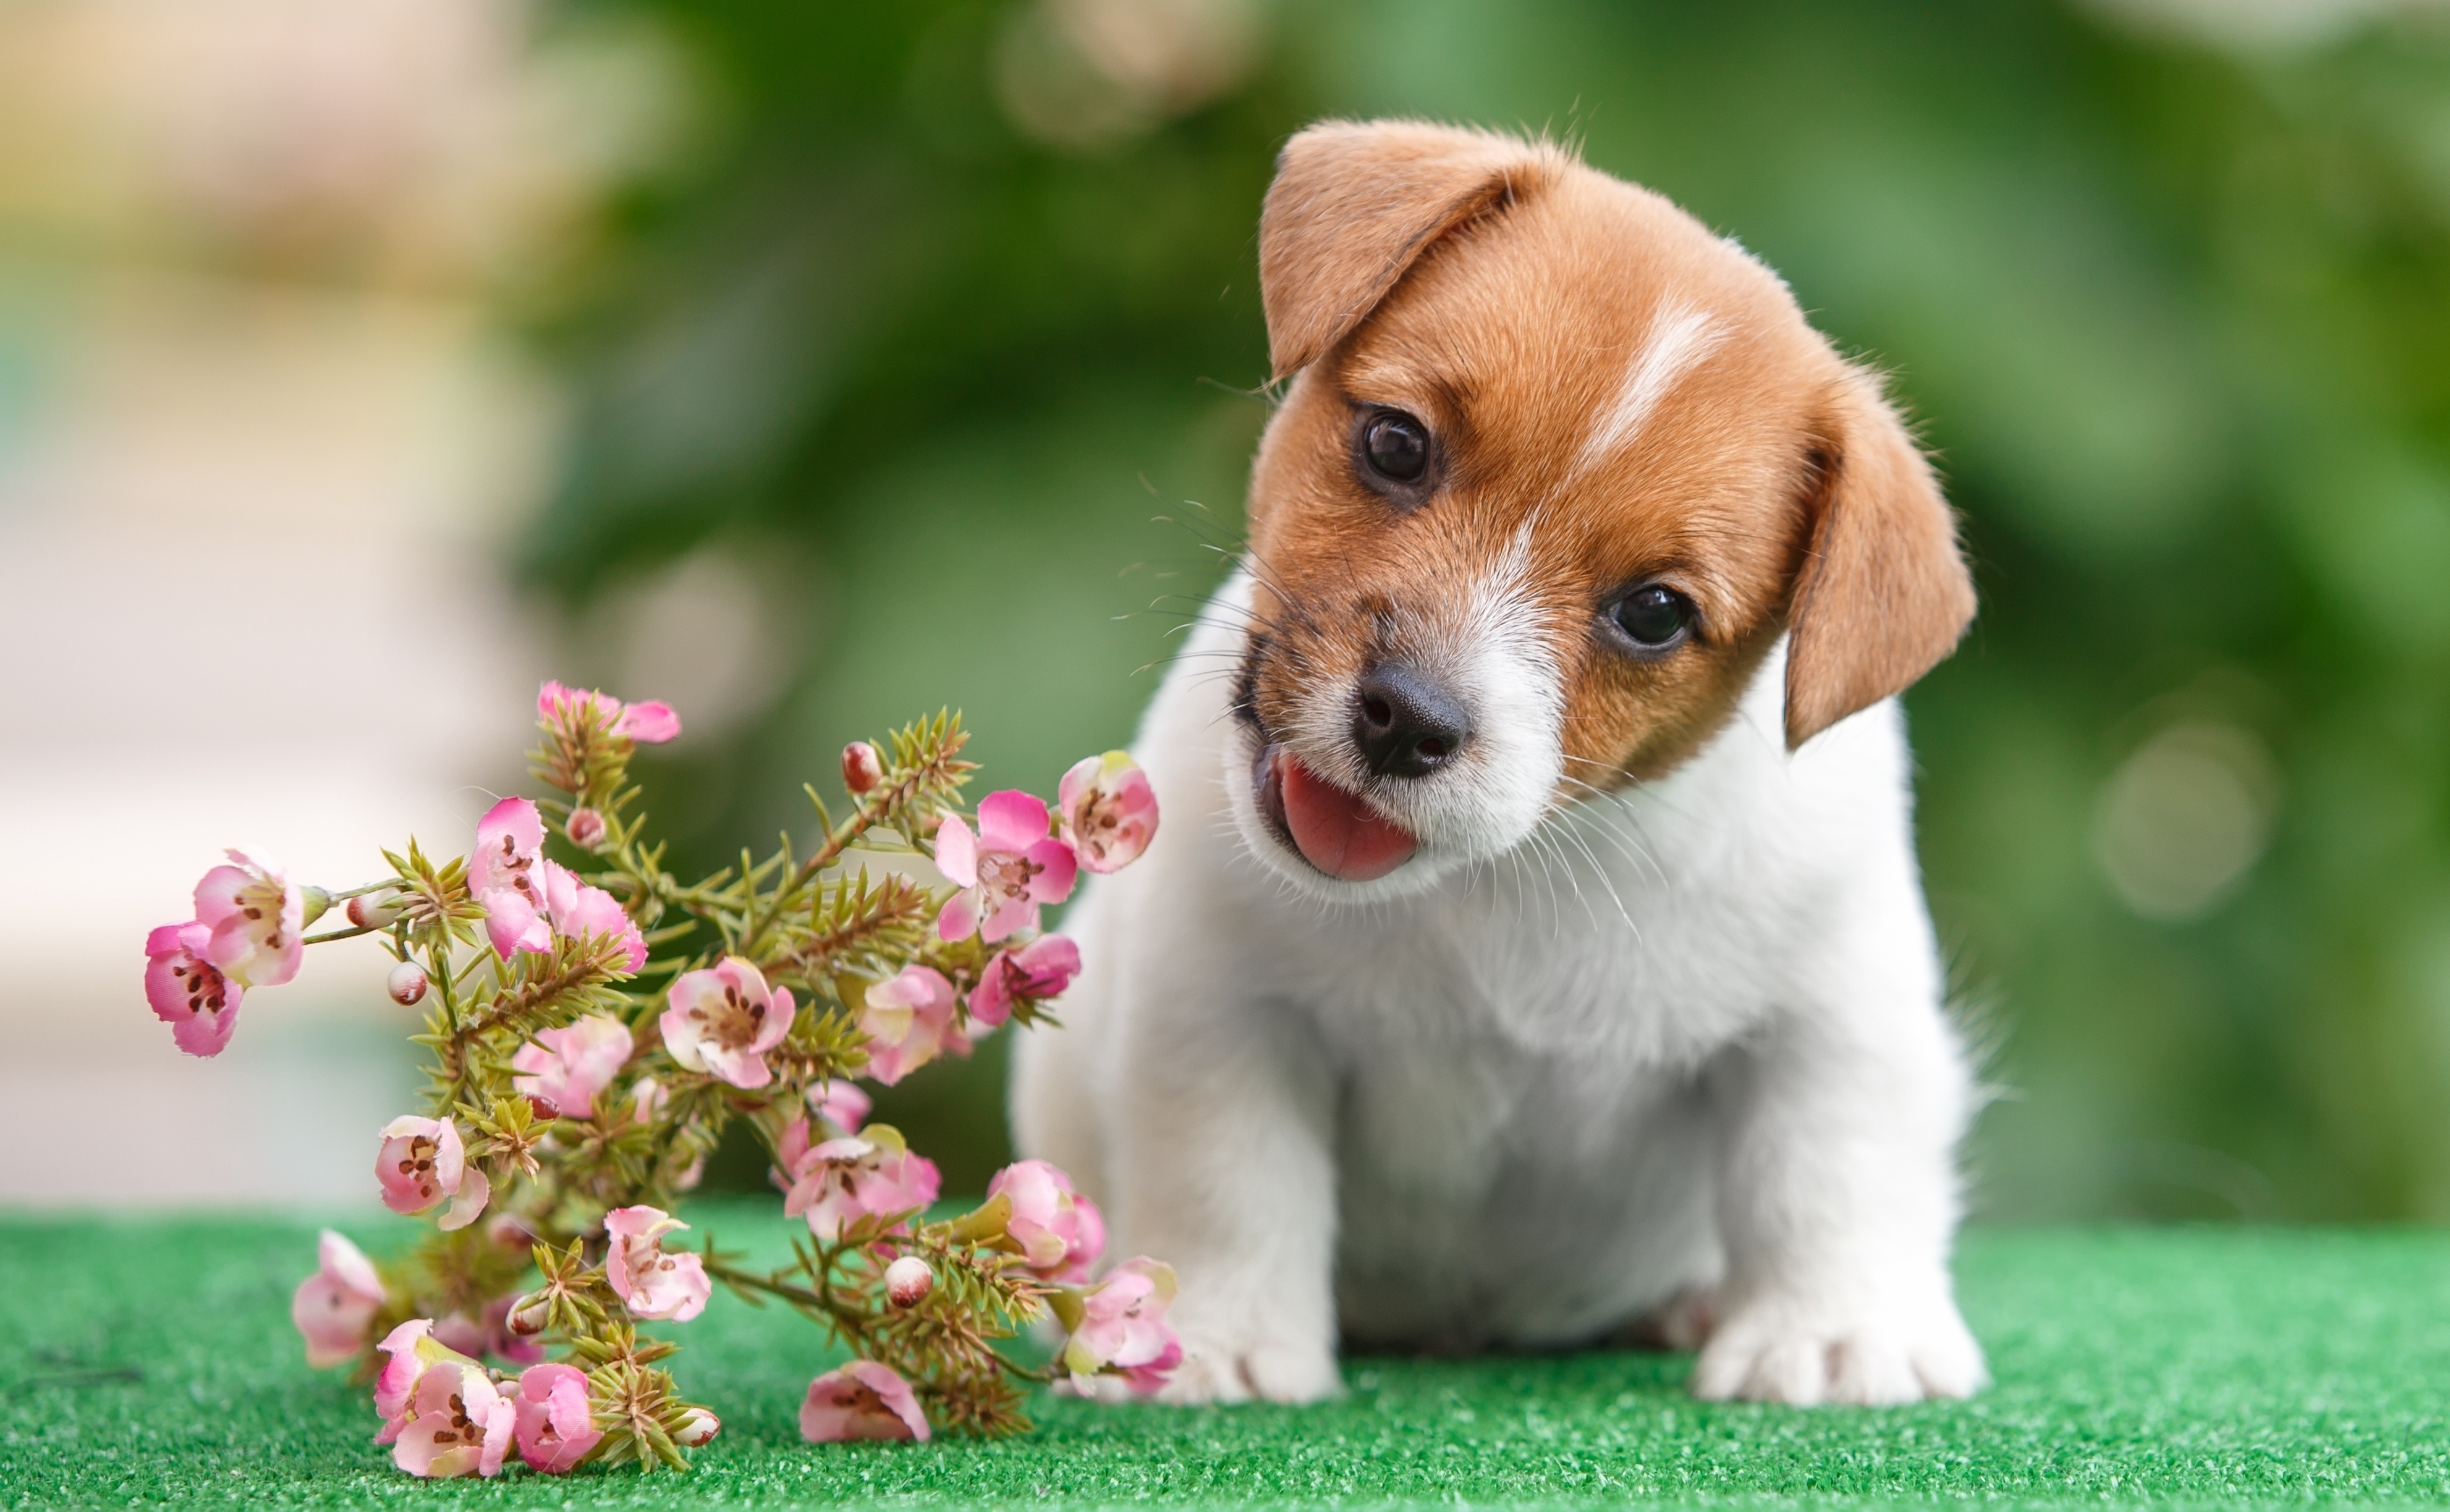 Funny puppy Jack Russell Terrier with flowers wallpaper and image